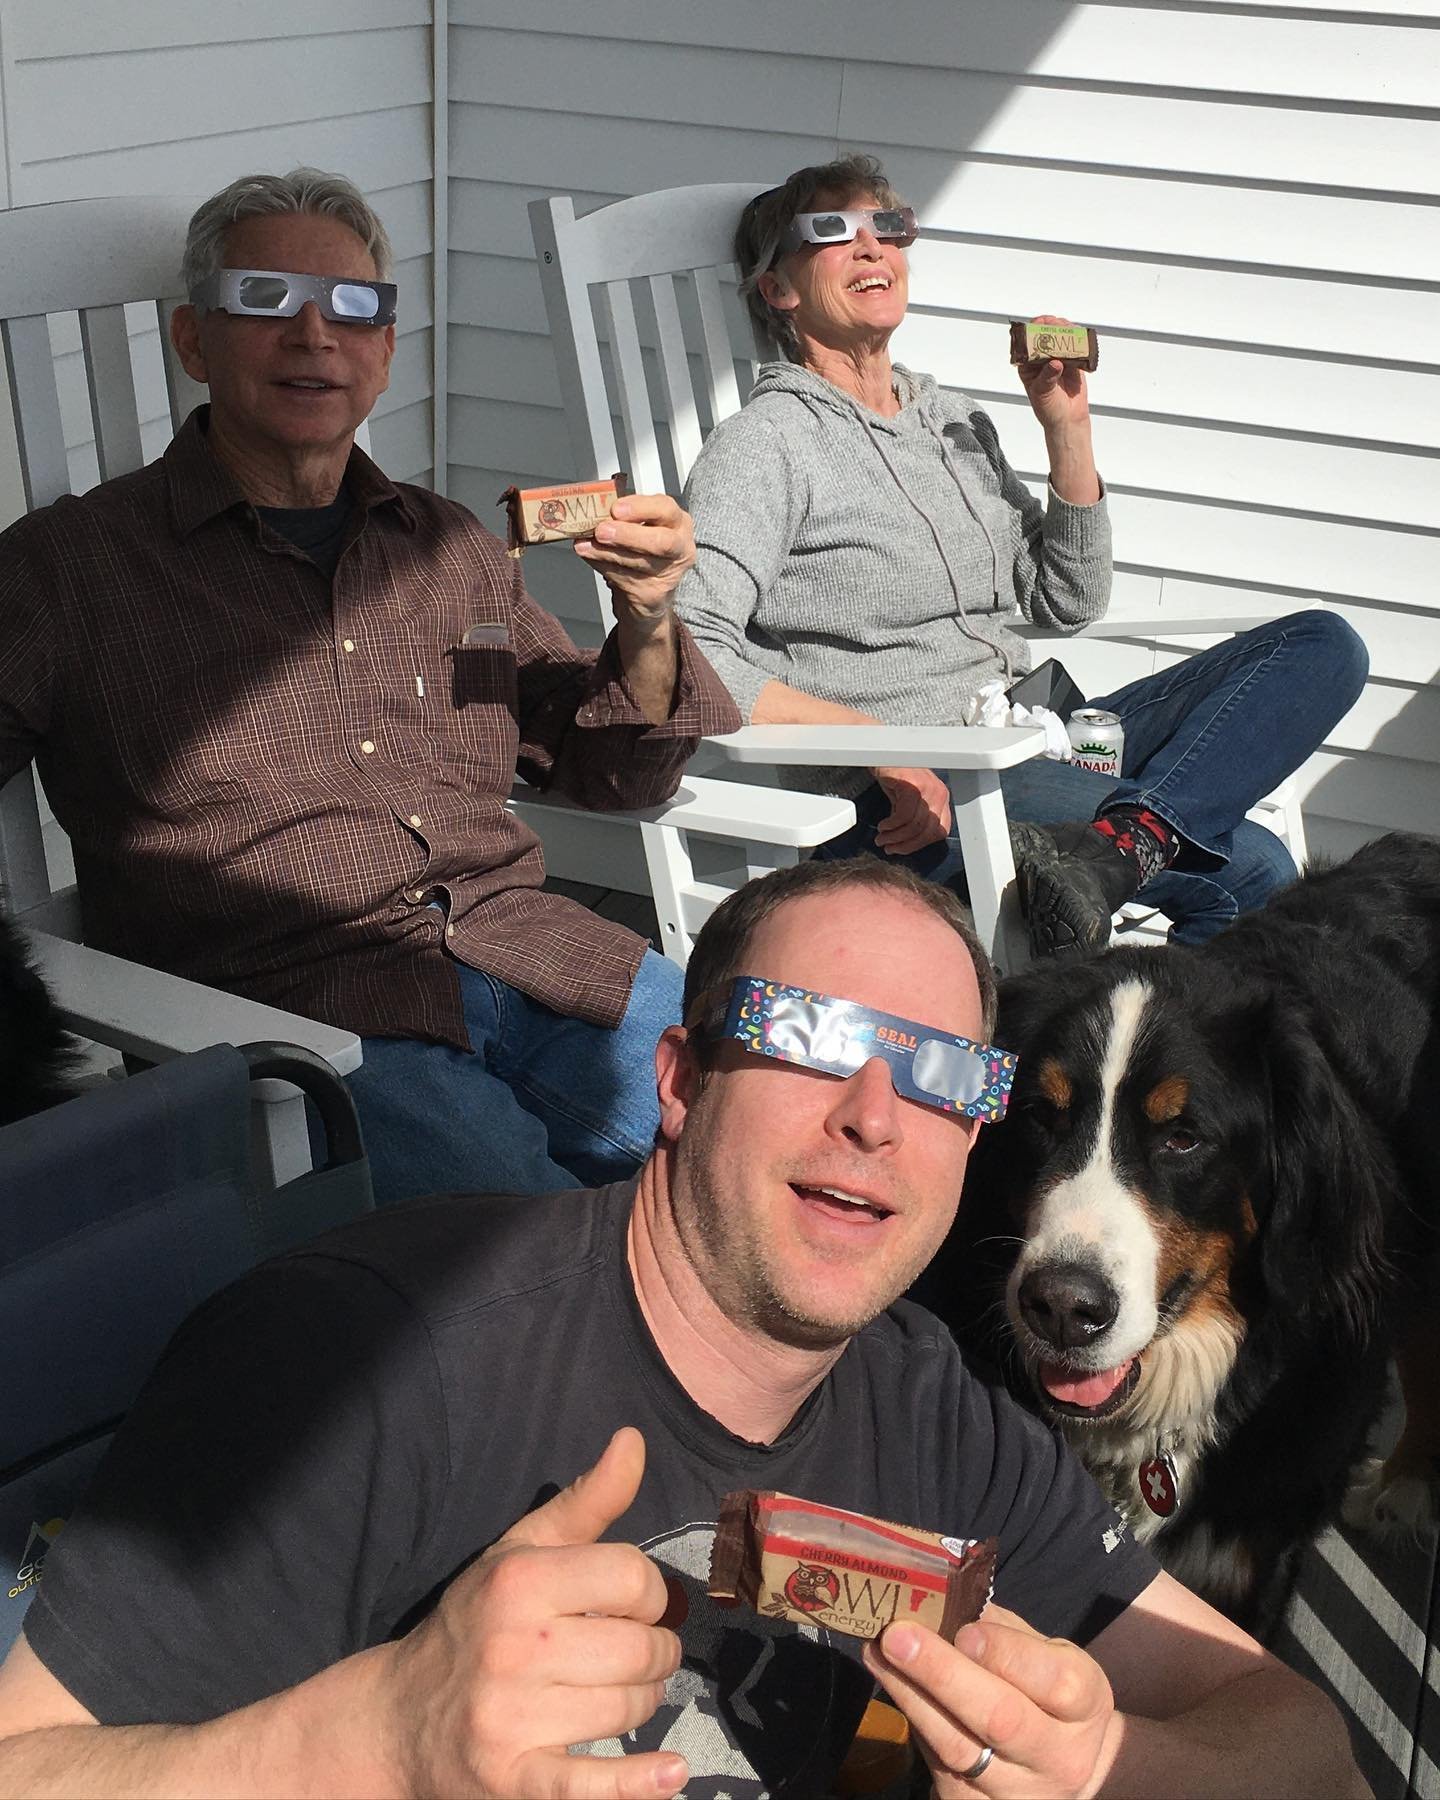 Incredible viewing of the eclipse from Shelburne, Vermont.  Snacks were had #eclipse #sky #sun #moon #totality #vermont #vermontbyvermonters #solareclipse #totaleclipseofthesun